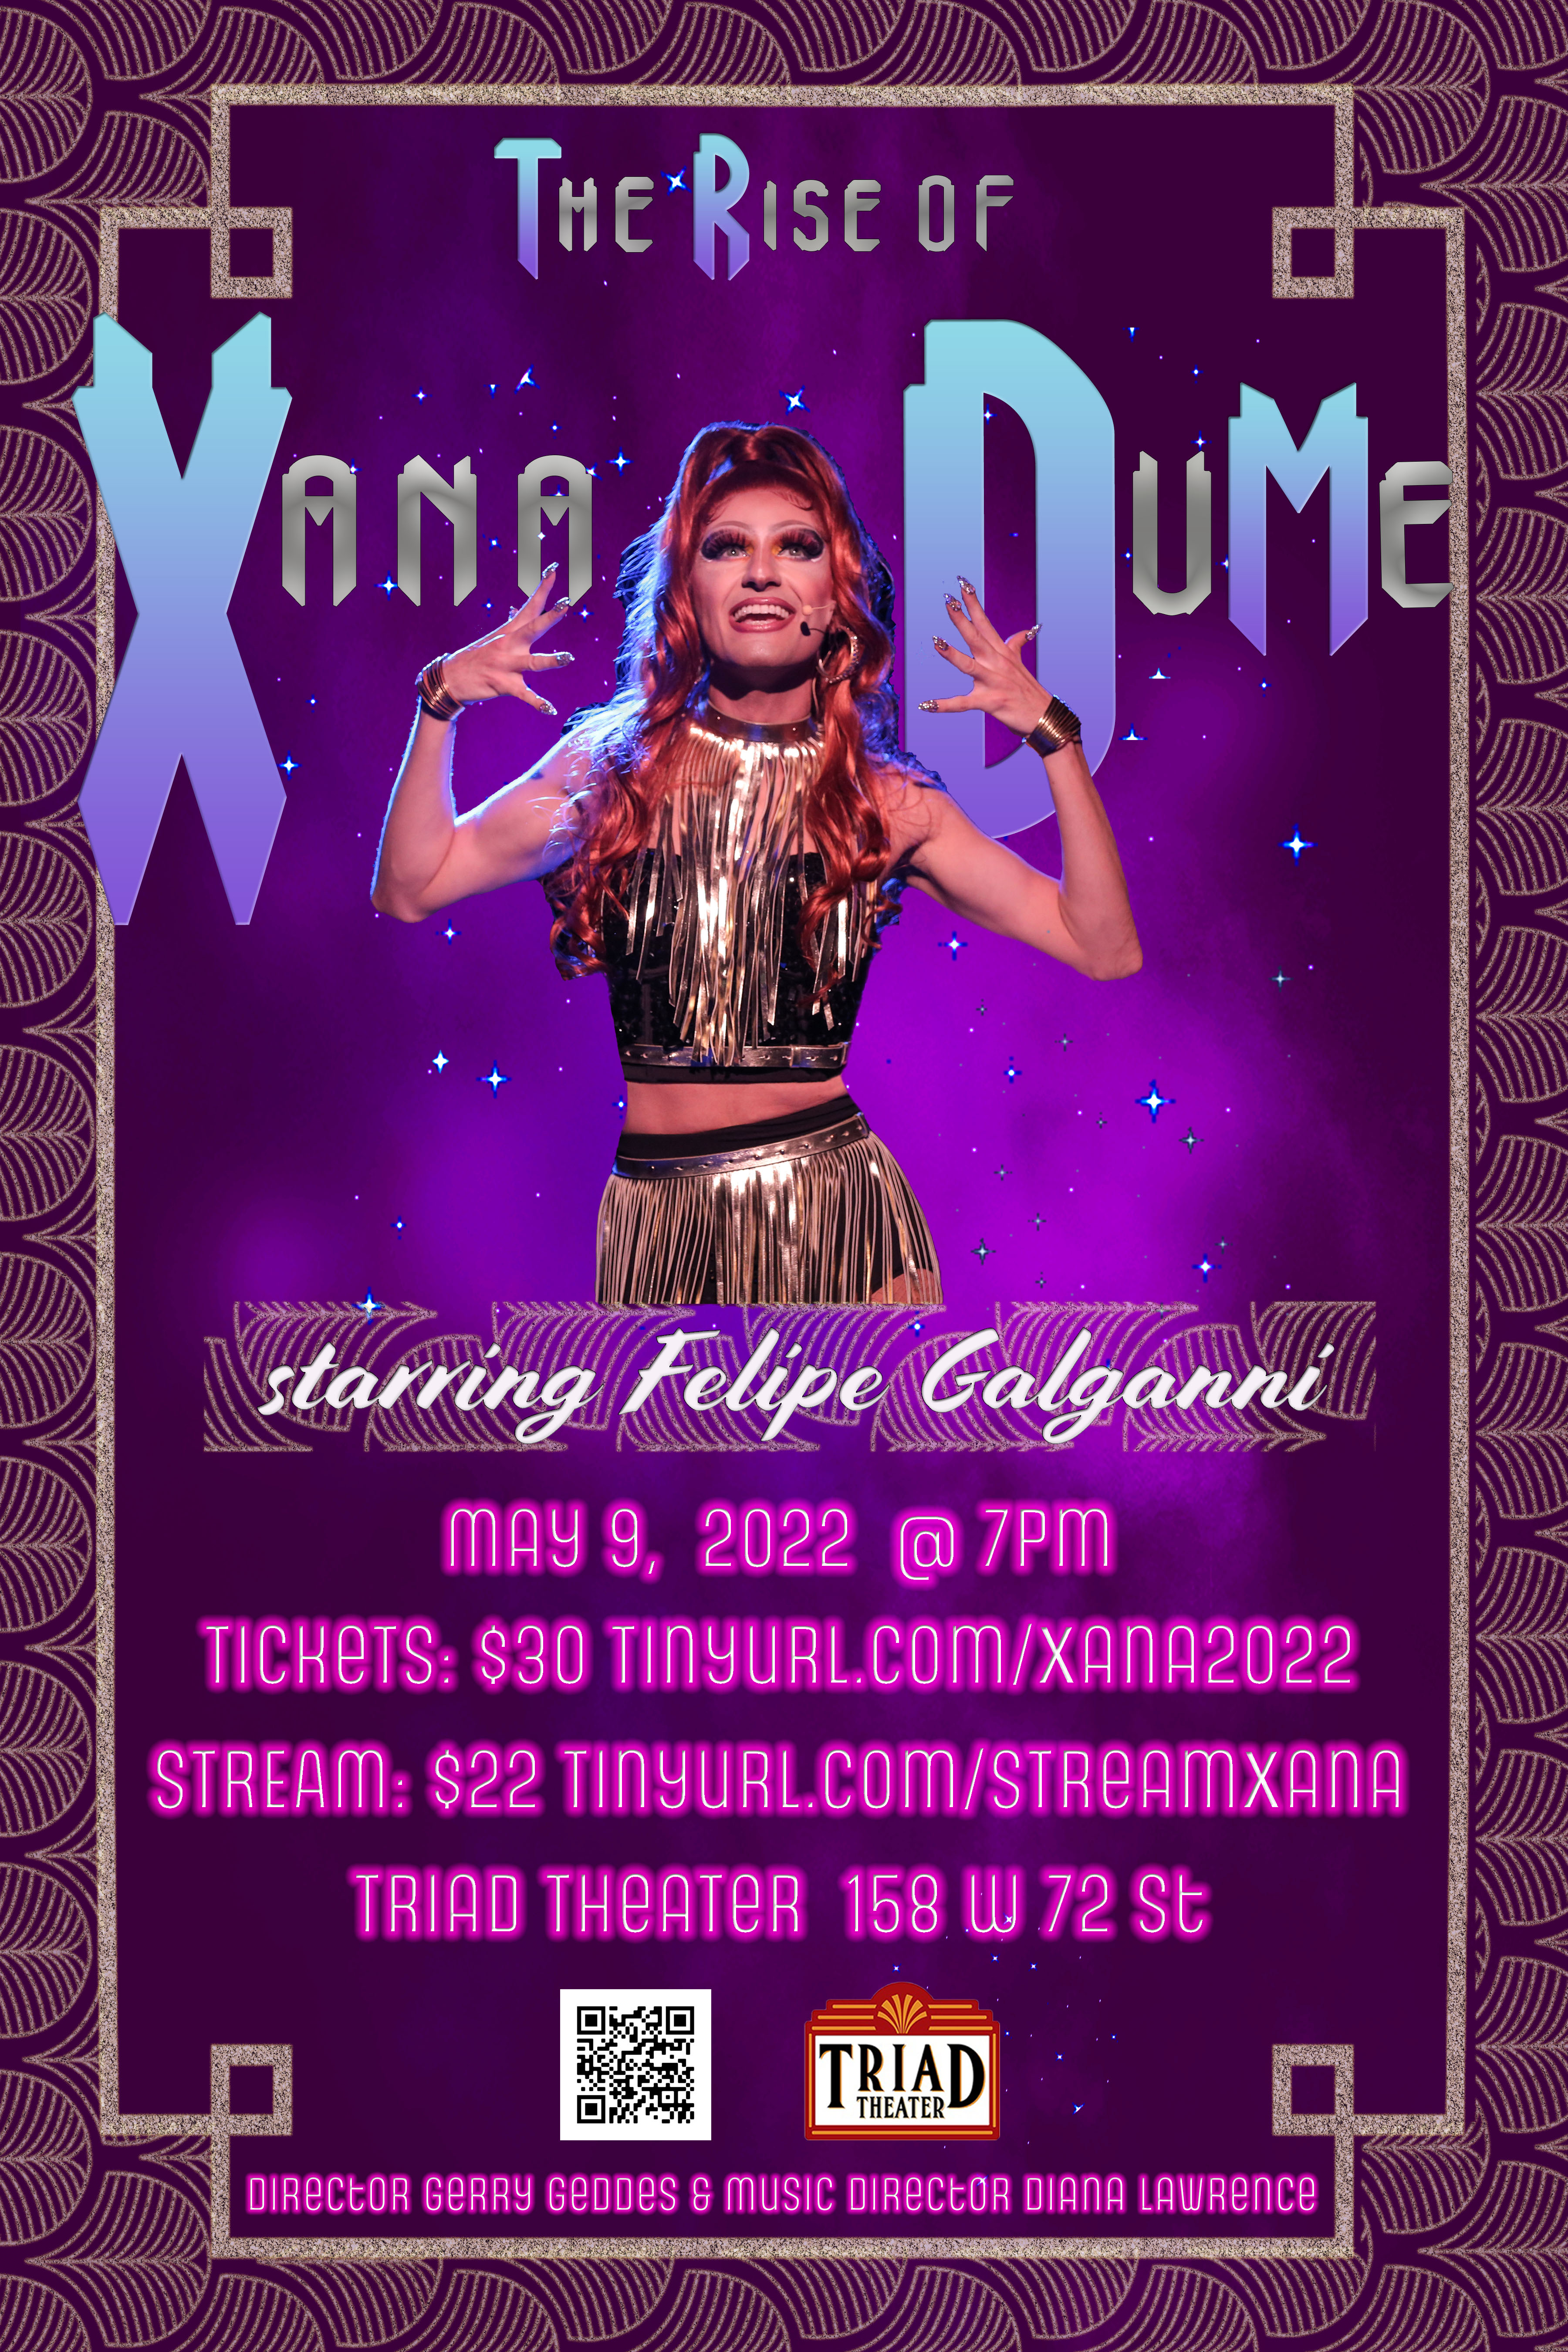 Felipe Galganni Is Back With THE RISE OF XANA DUME at The Triad Theater on May 9 